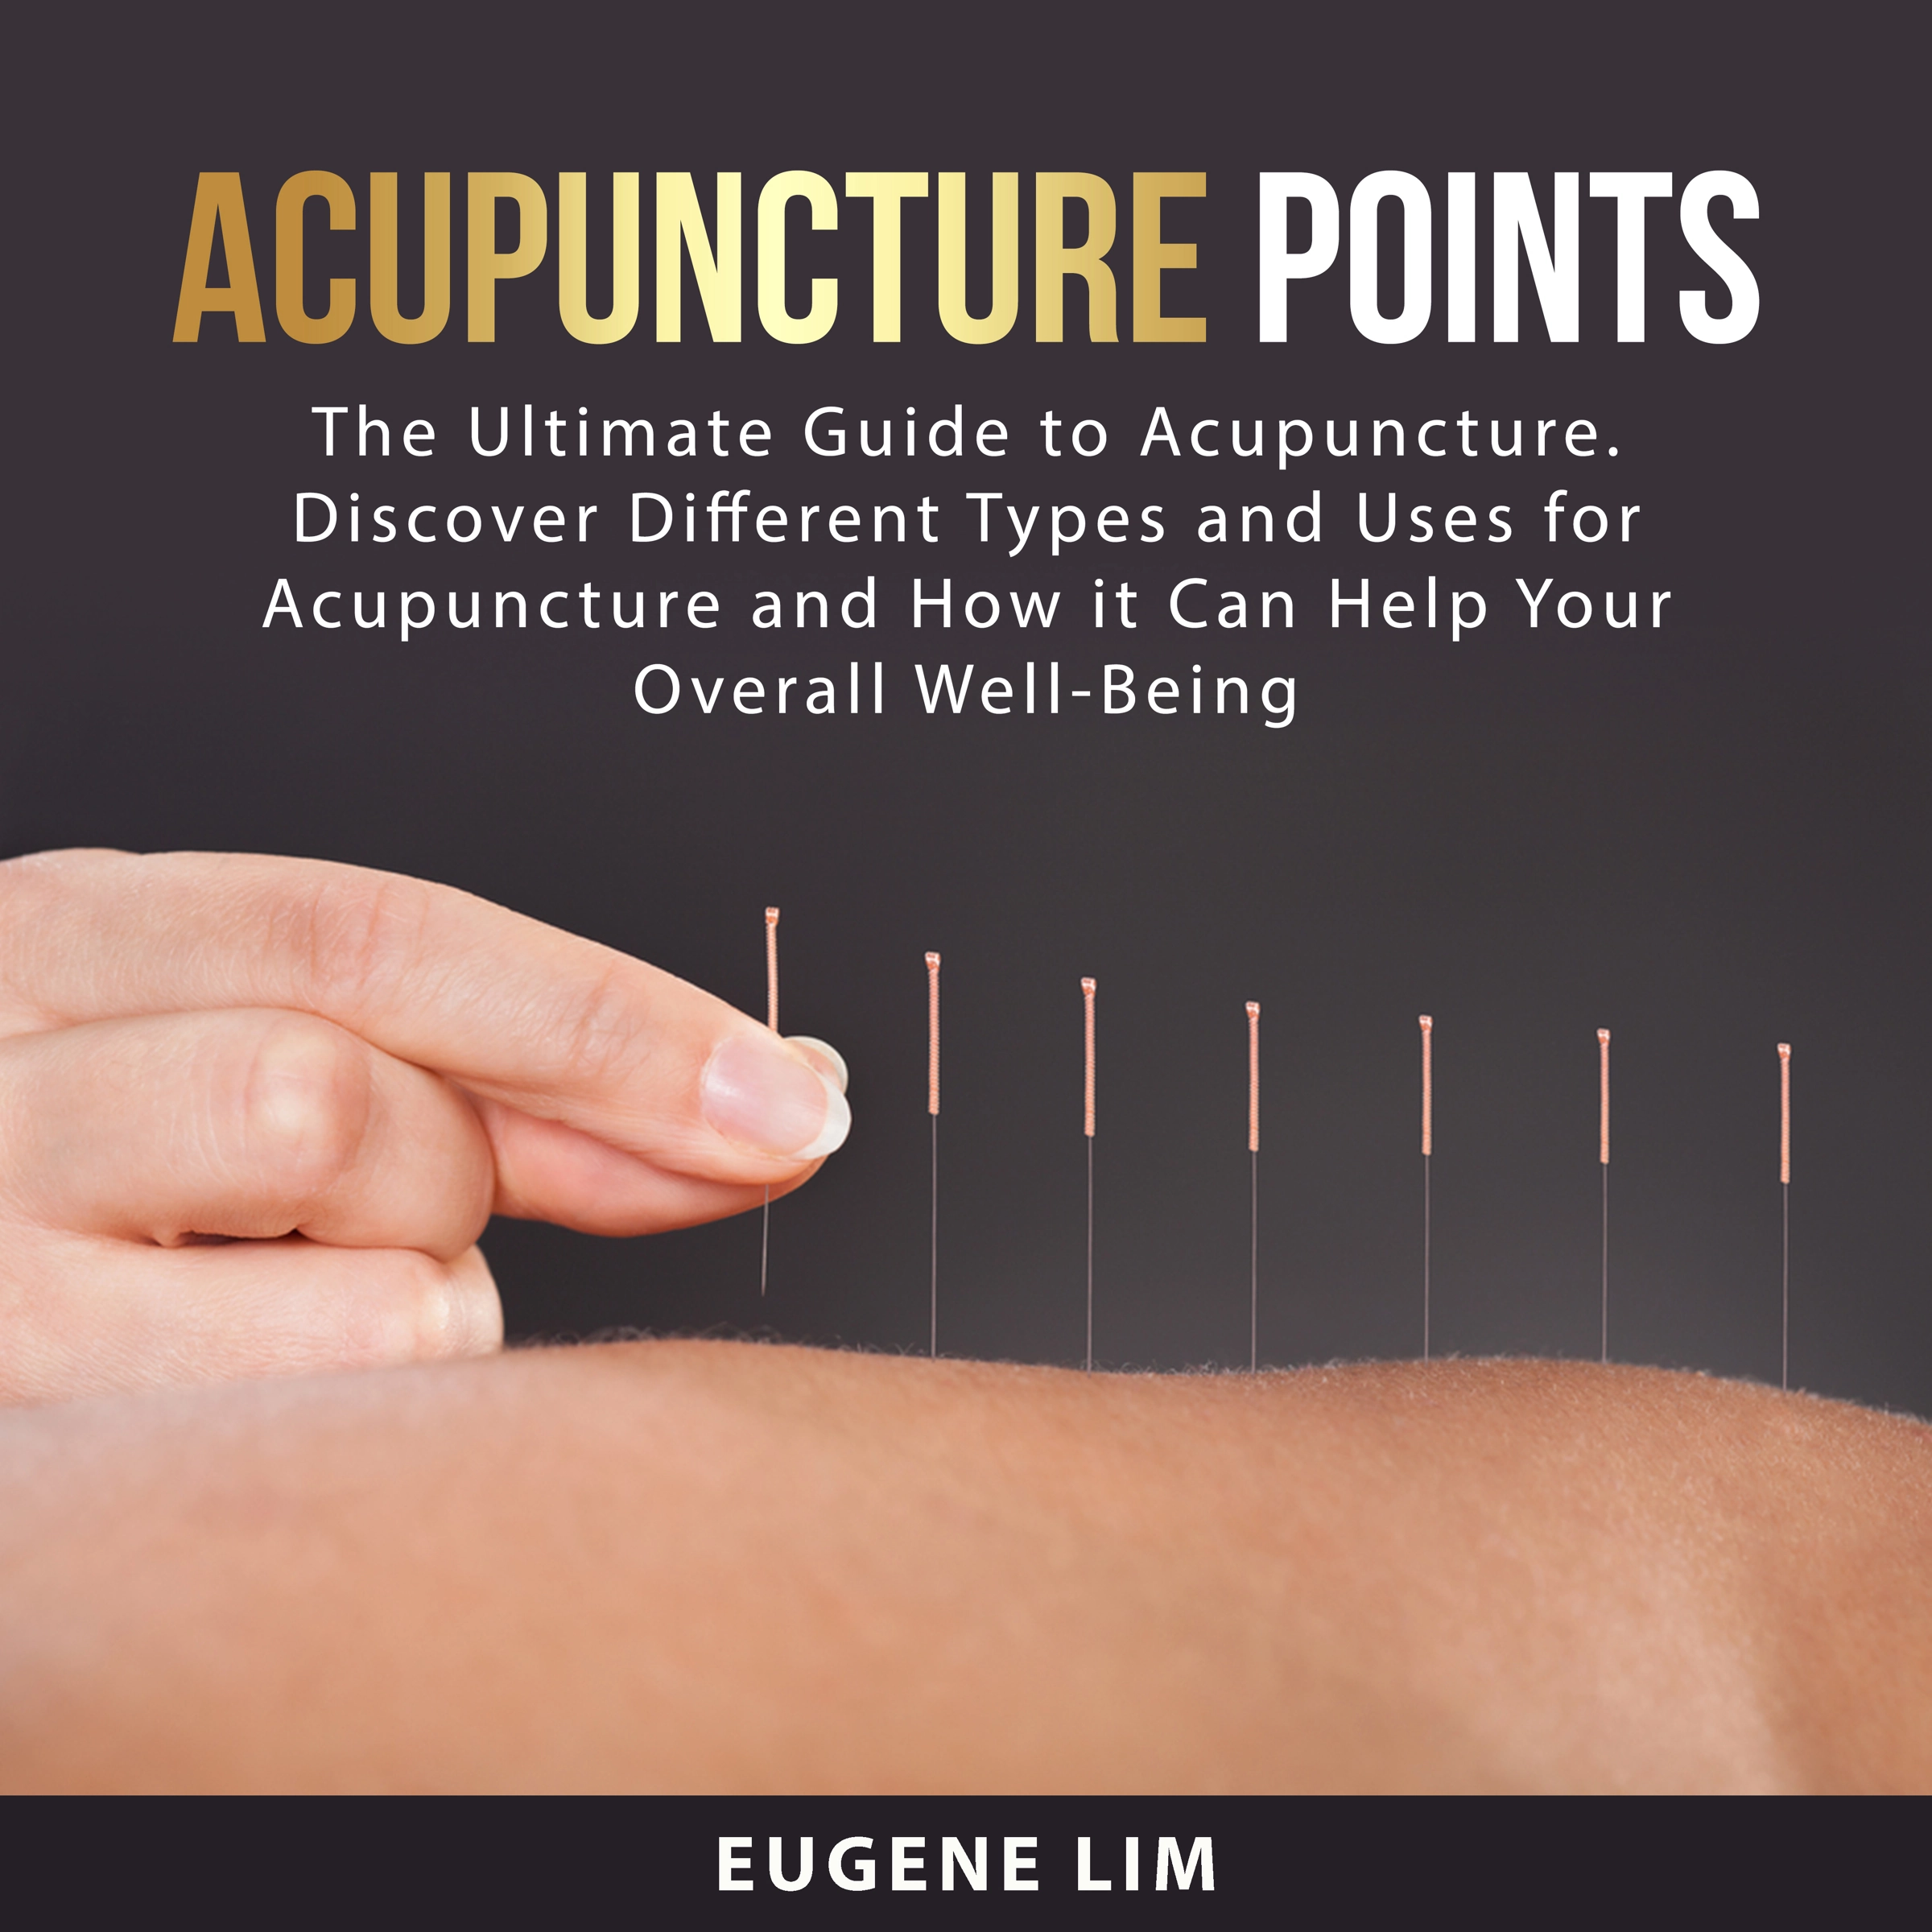 Acupuncture Points Audiobook by Eugene Lim